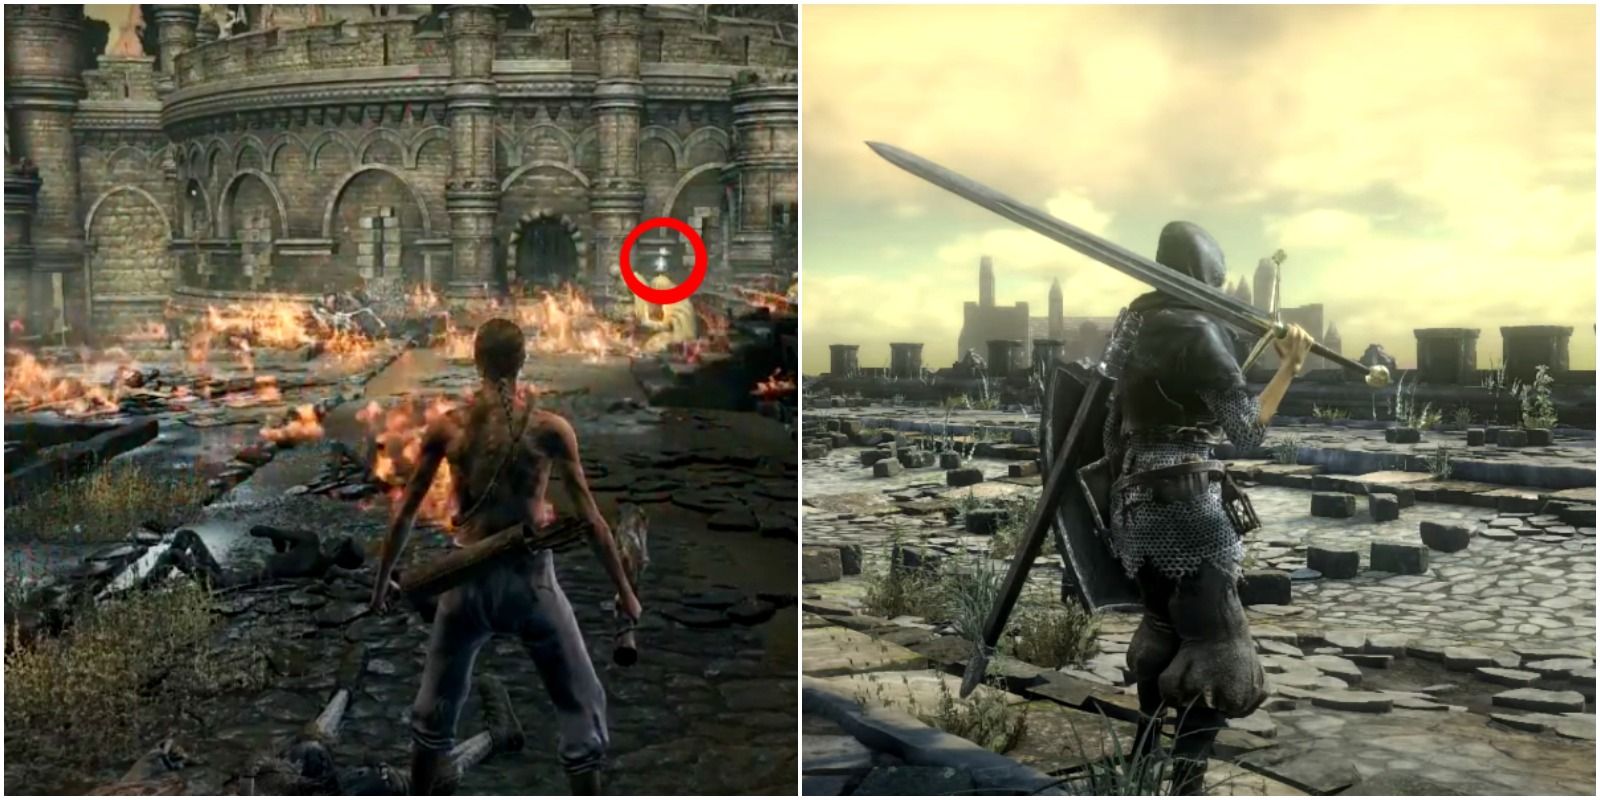 the item lying in fire and the player holding a claymore greatsword.